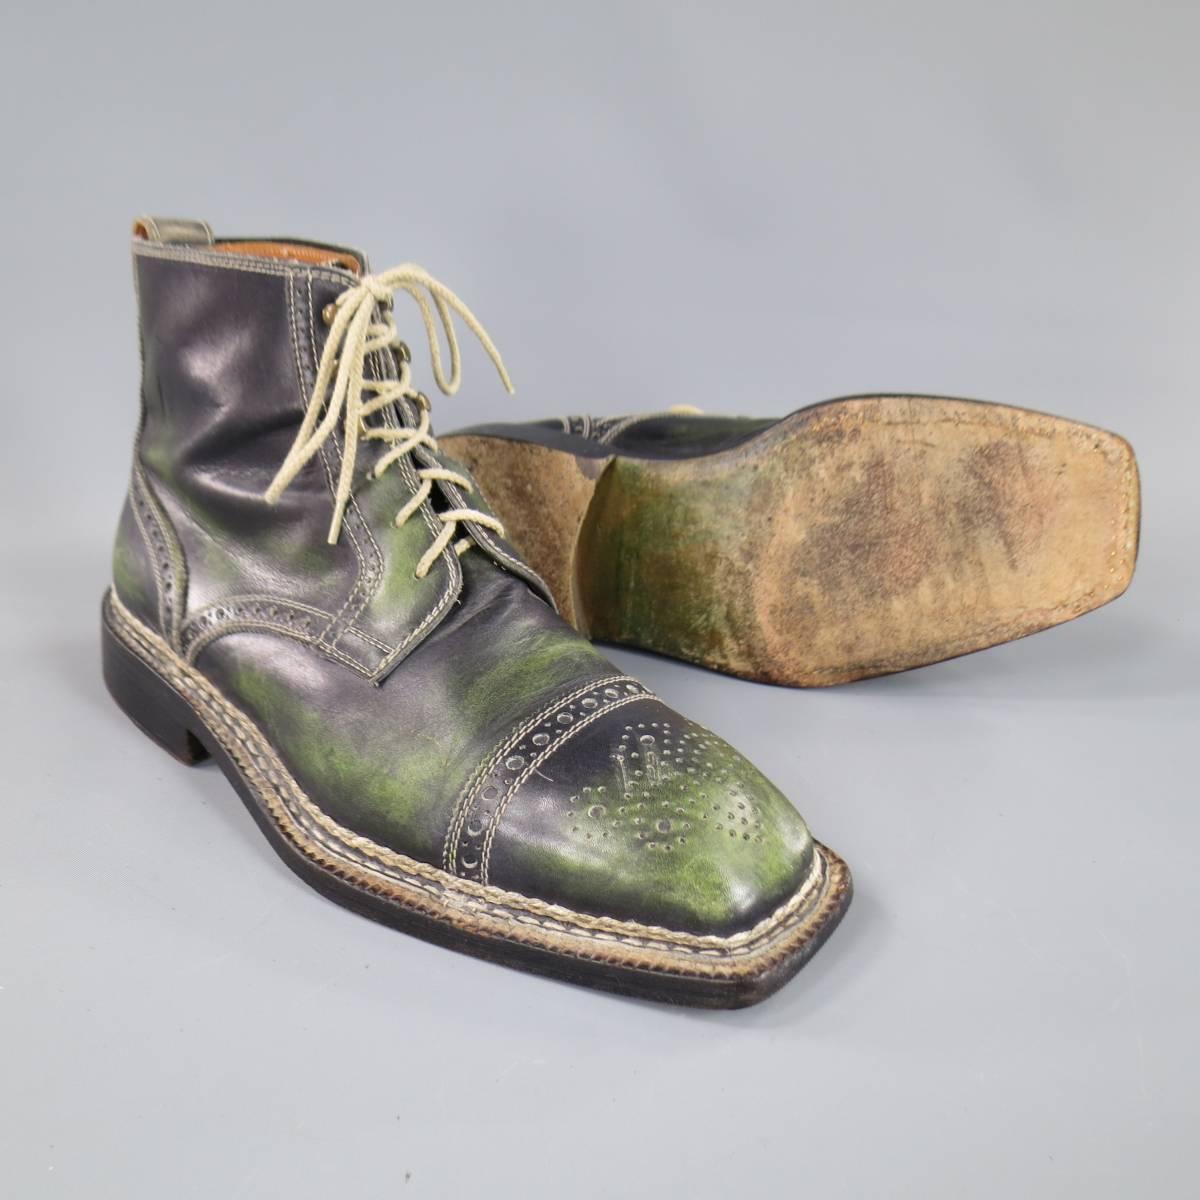 These funky BETTANIN & VENTURI ankle boots come in a unique black and green distressed treated leather and feature a square cap toe with brogue detail, brogue piping, and black heeled sole with contrast stitching. Made in Italy.
 
Good Pre-Owned